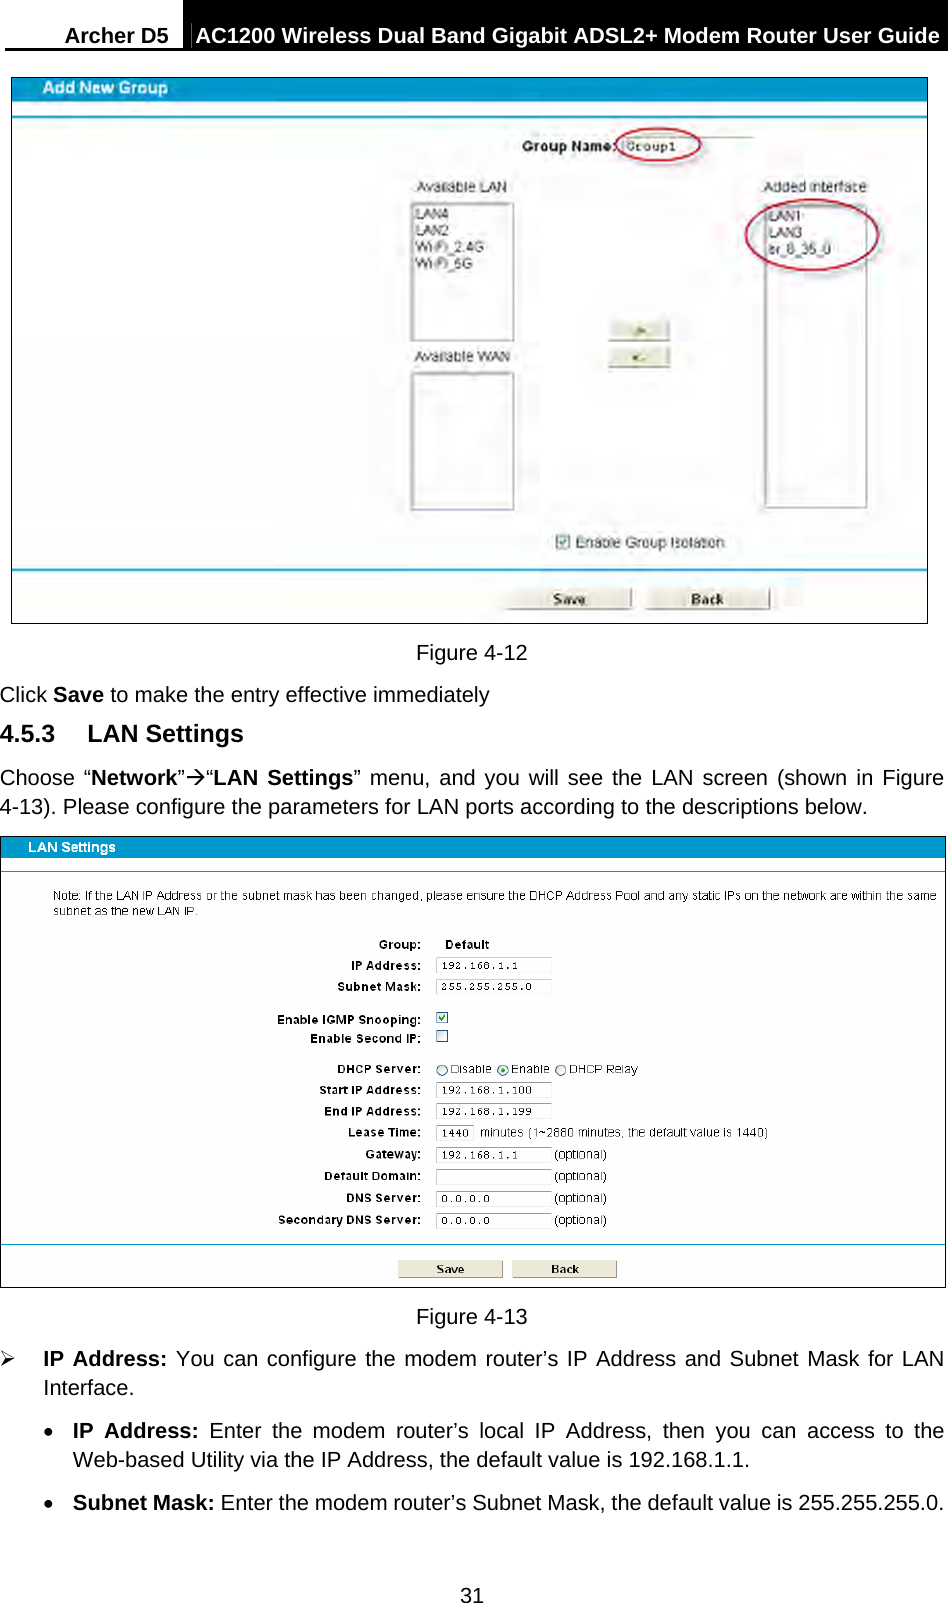 Archer D5  AC1200 Wireless Dual Band Gigabit ADSL2+ Modem Router User Guide 31   Figure 4-12 Click Save to make the entry effective immediately 4.5.3  LAN Settings Choose “Network”“LAN Settings” menu, and you will see the LAN screen (shown in Figure 4-13). Please configure the parameters for LAN ports according to the descriptions below.  Figure 4-13  IP Address: You can configure the modem router’s IP Address and Subnet Mask for LAN Interface.  IP Address: Enter the modem router’s local IP Address, then you can access to the Web-based Utility via the IP Address, the default value is 192.168.1.1.  Subnet Mask: Enter the modem router’s Subnet Mask, the default value is 255.255.255.0. 